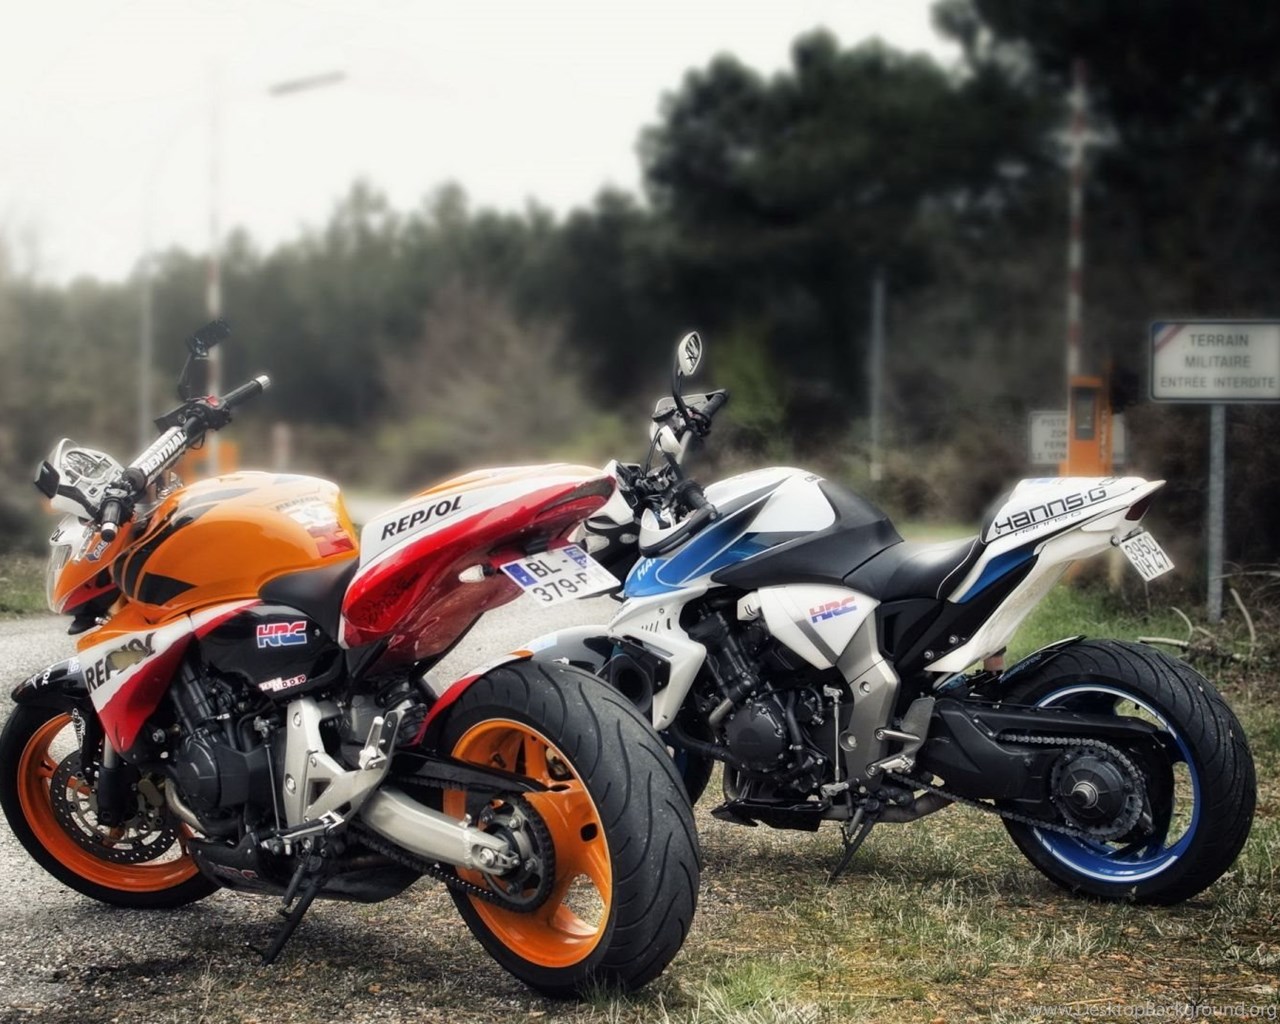 Download Wallpapers 1920x1080 Hornet And Cb100r Bikes Road Full